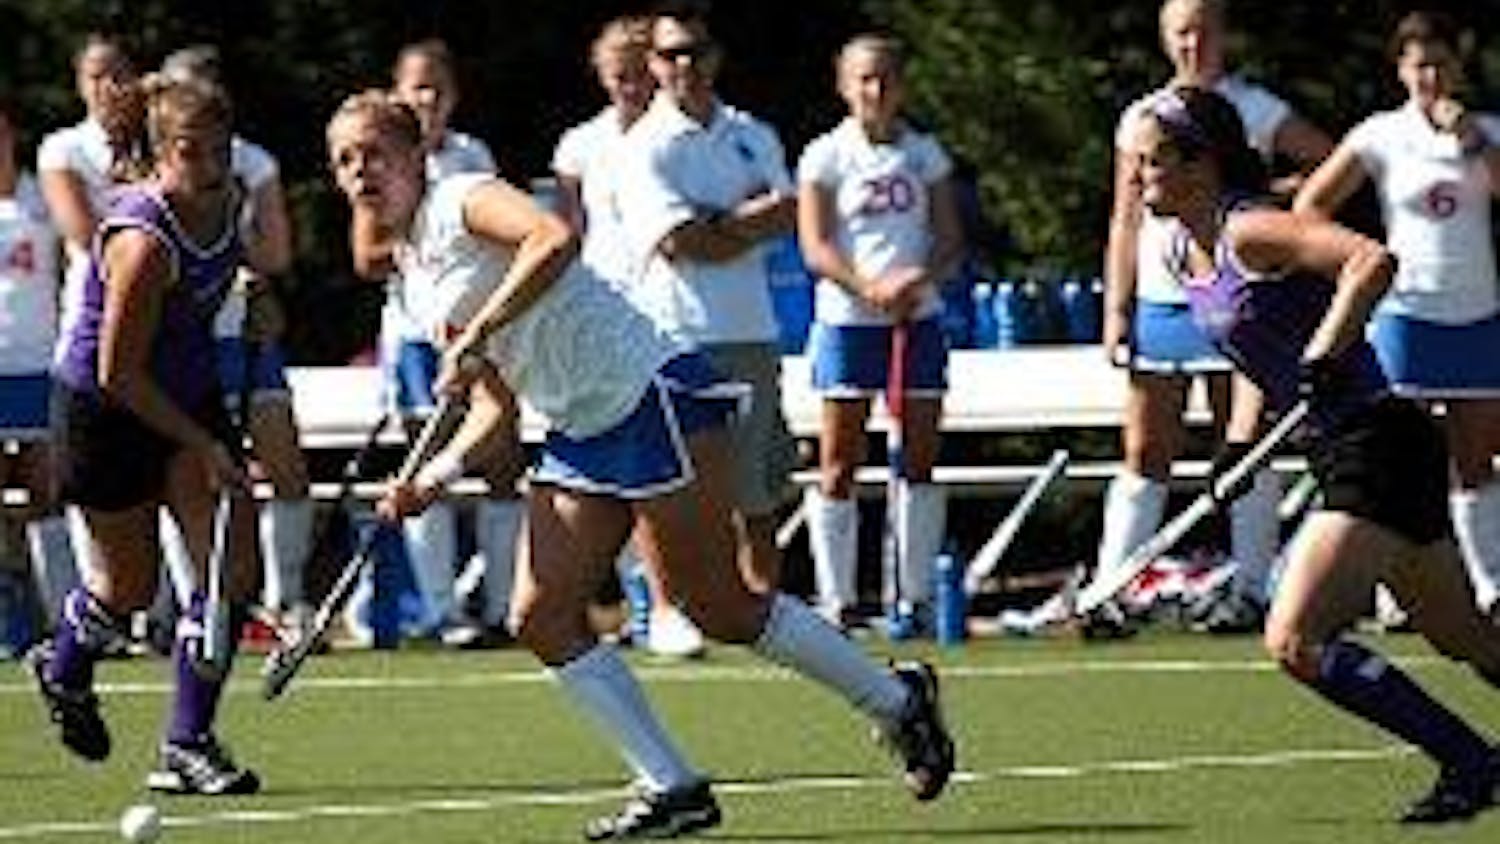 LOOKING UP - No. 7 Anne-Meike De Wiljes looks upfield to complete the pass to one of her teammates this year as part of the No. 18 ranked Eagles field hockey team. The Eagles were defeated by the Wake Forest Demon Deacons in the first round of the NCAA to